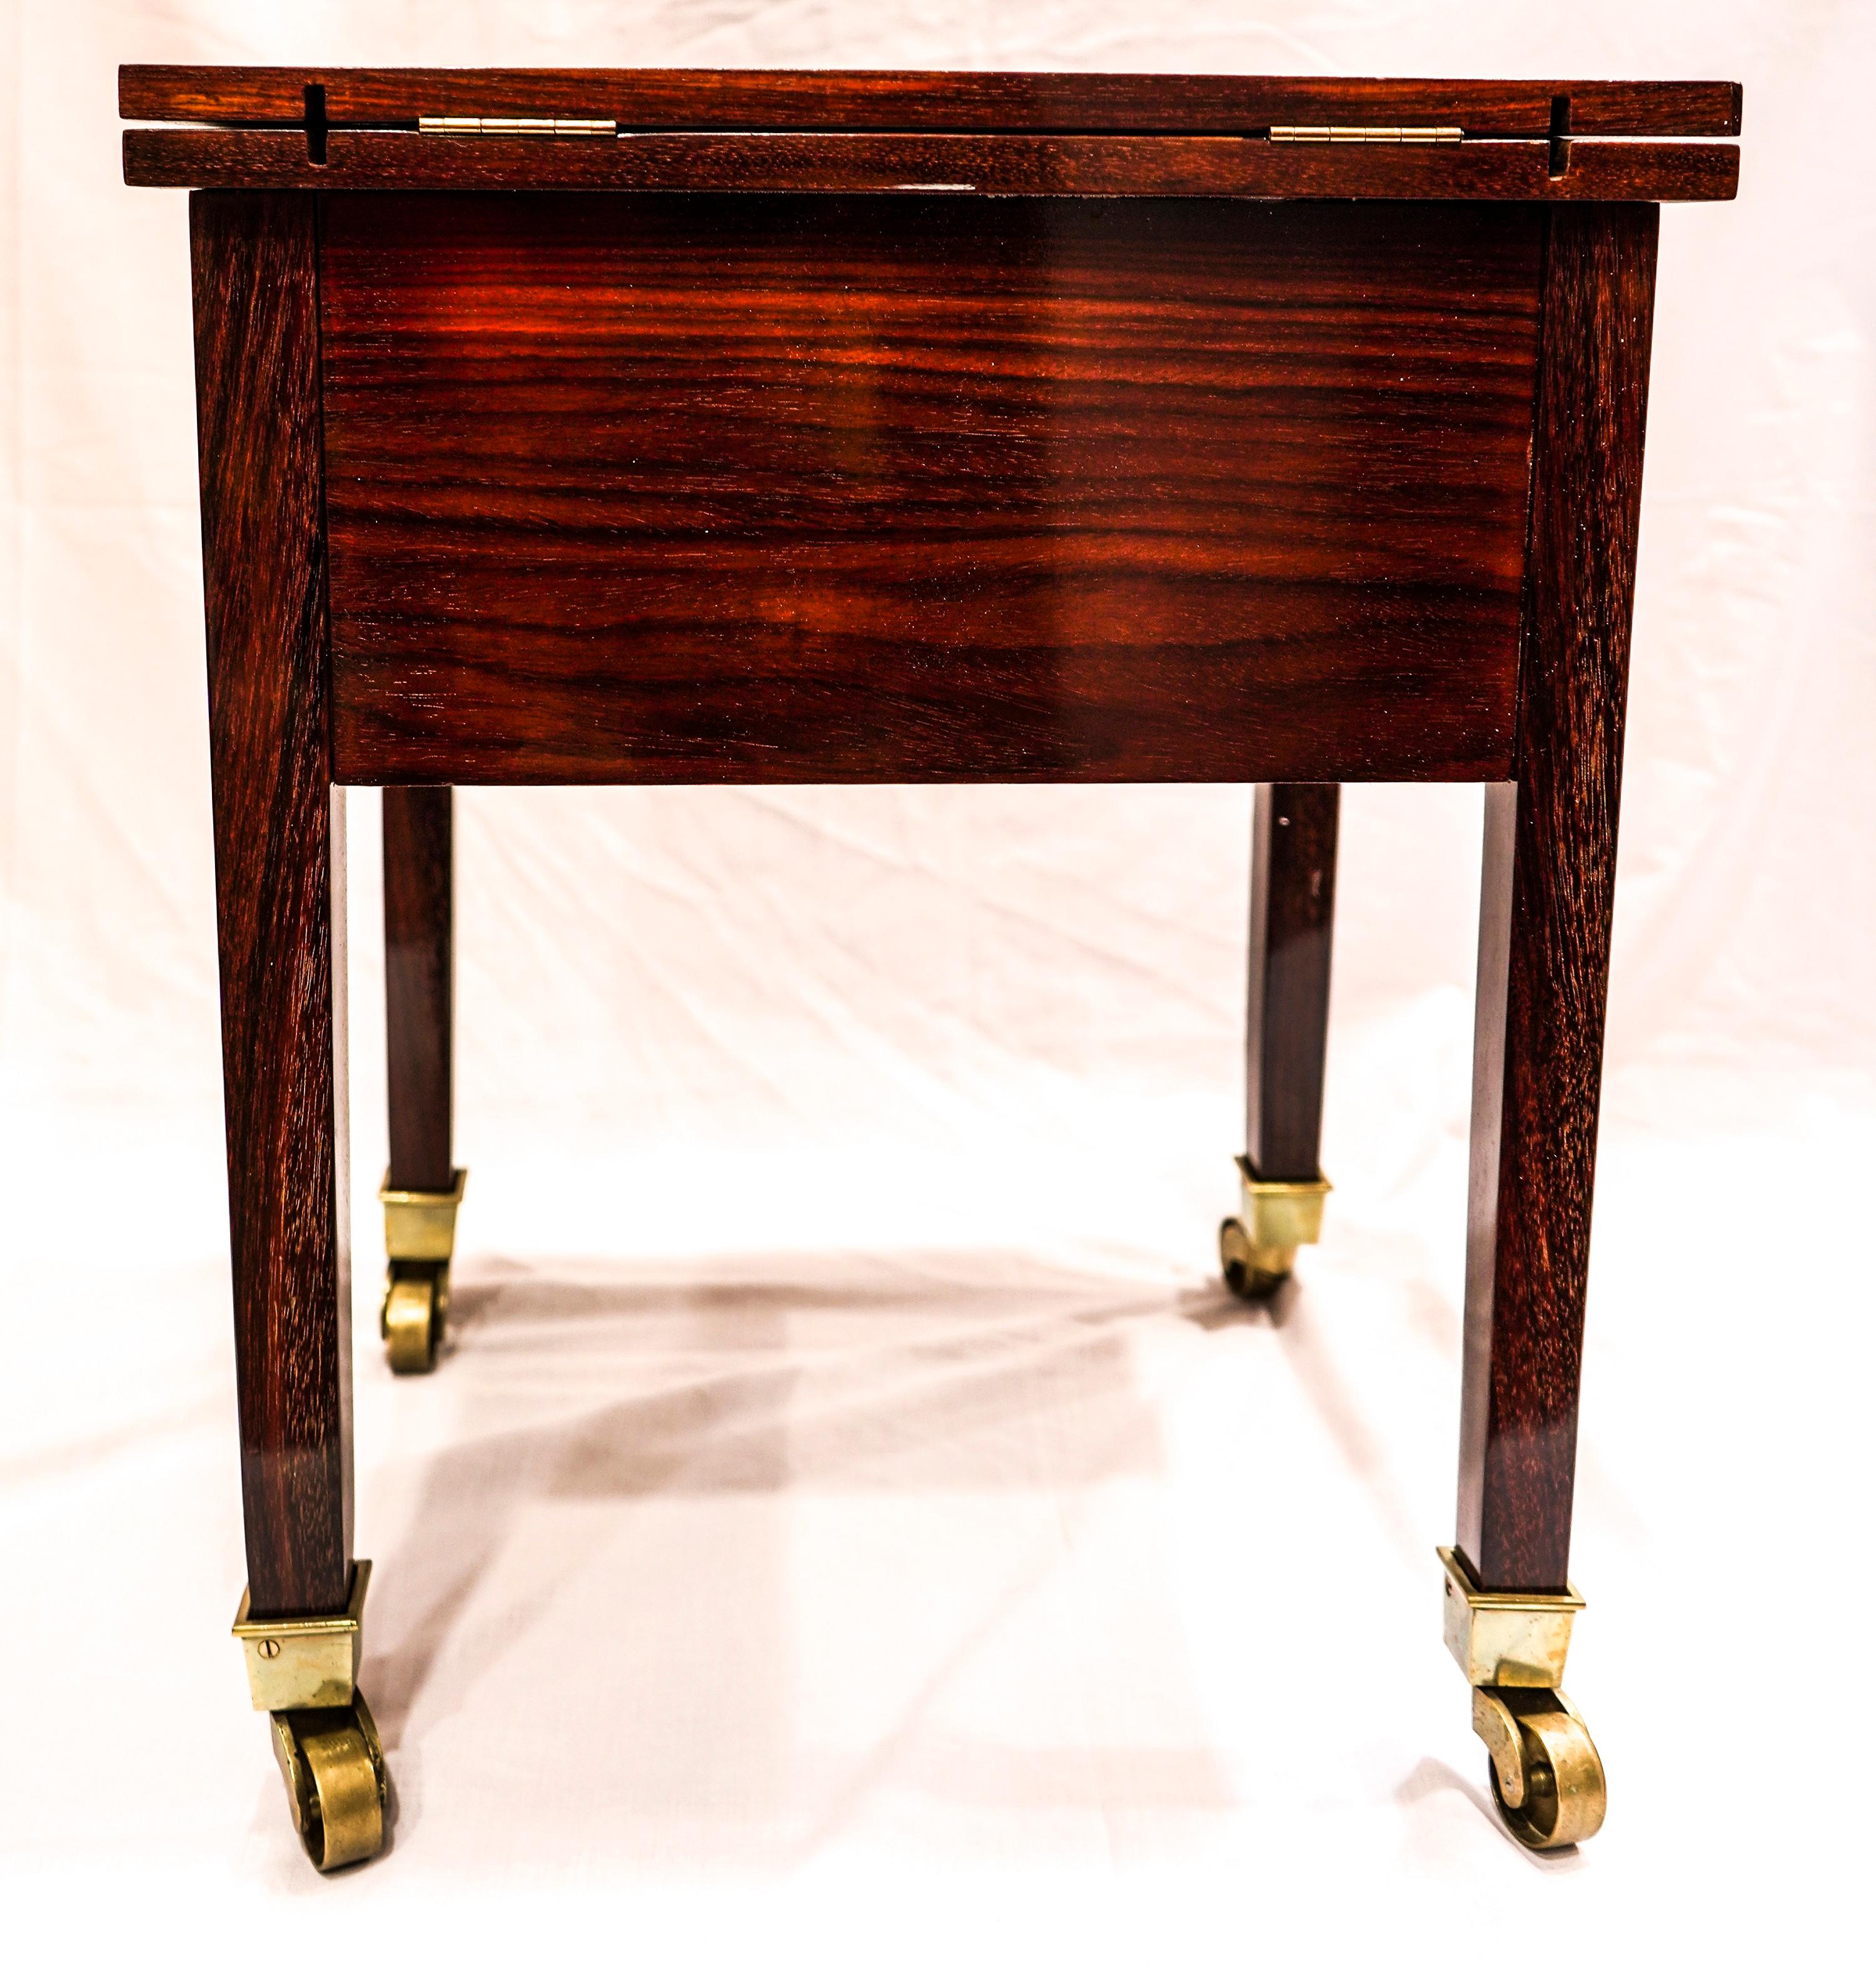 Exquisite and stunning piece for collector, is a bar cart by Portois & Fix, Wien, one of the best manufacturers of the Austrian modernism or Jugendstil, architects as Hoffman or Otto Wagner worked with them.
Is a bar cart in mahogany with golded